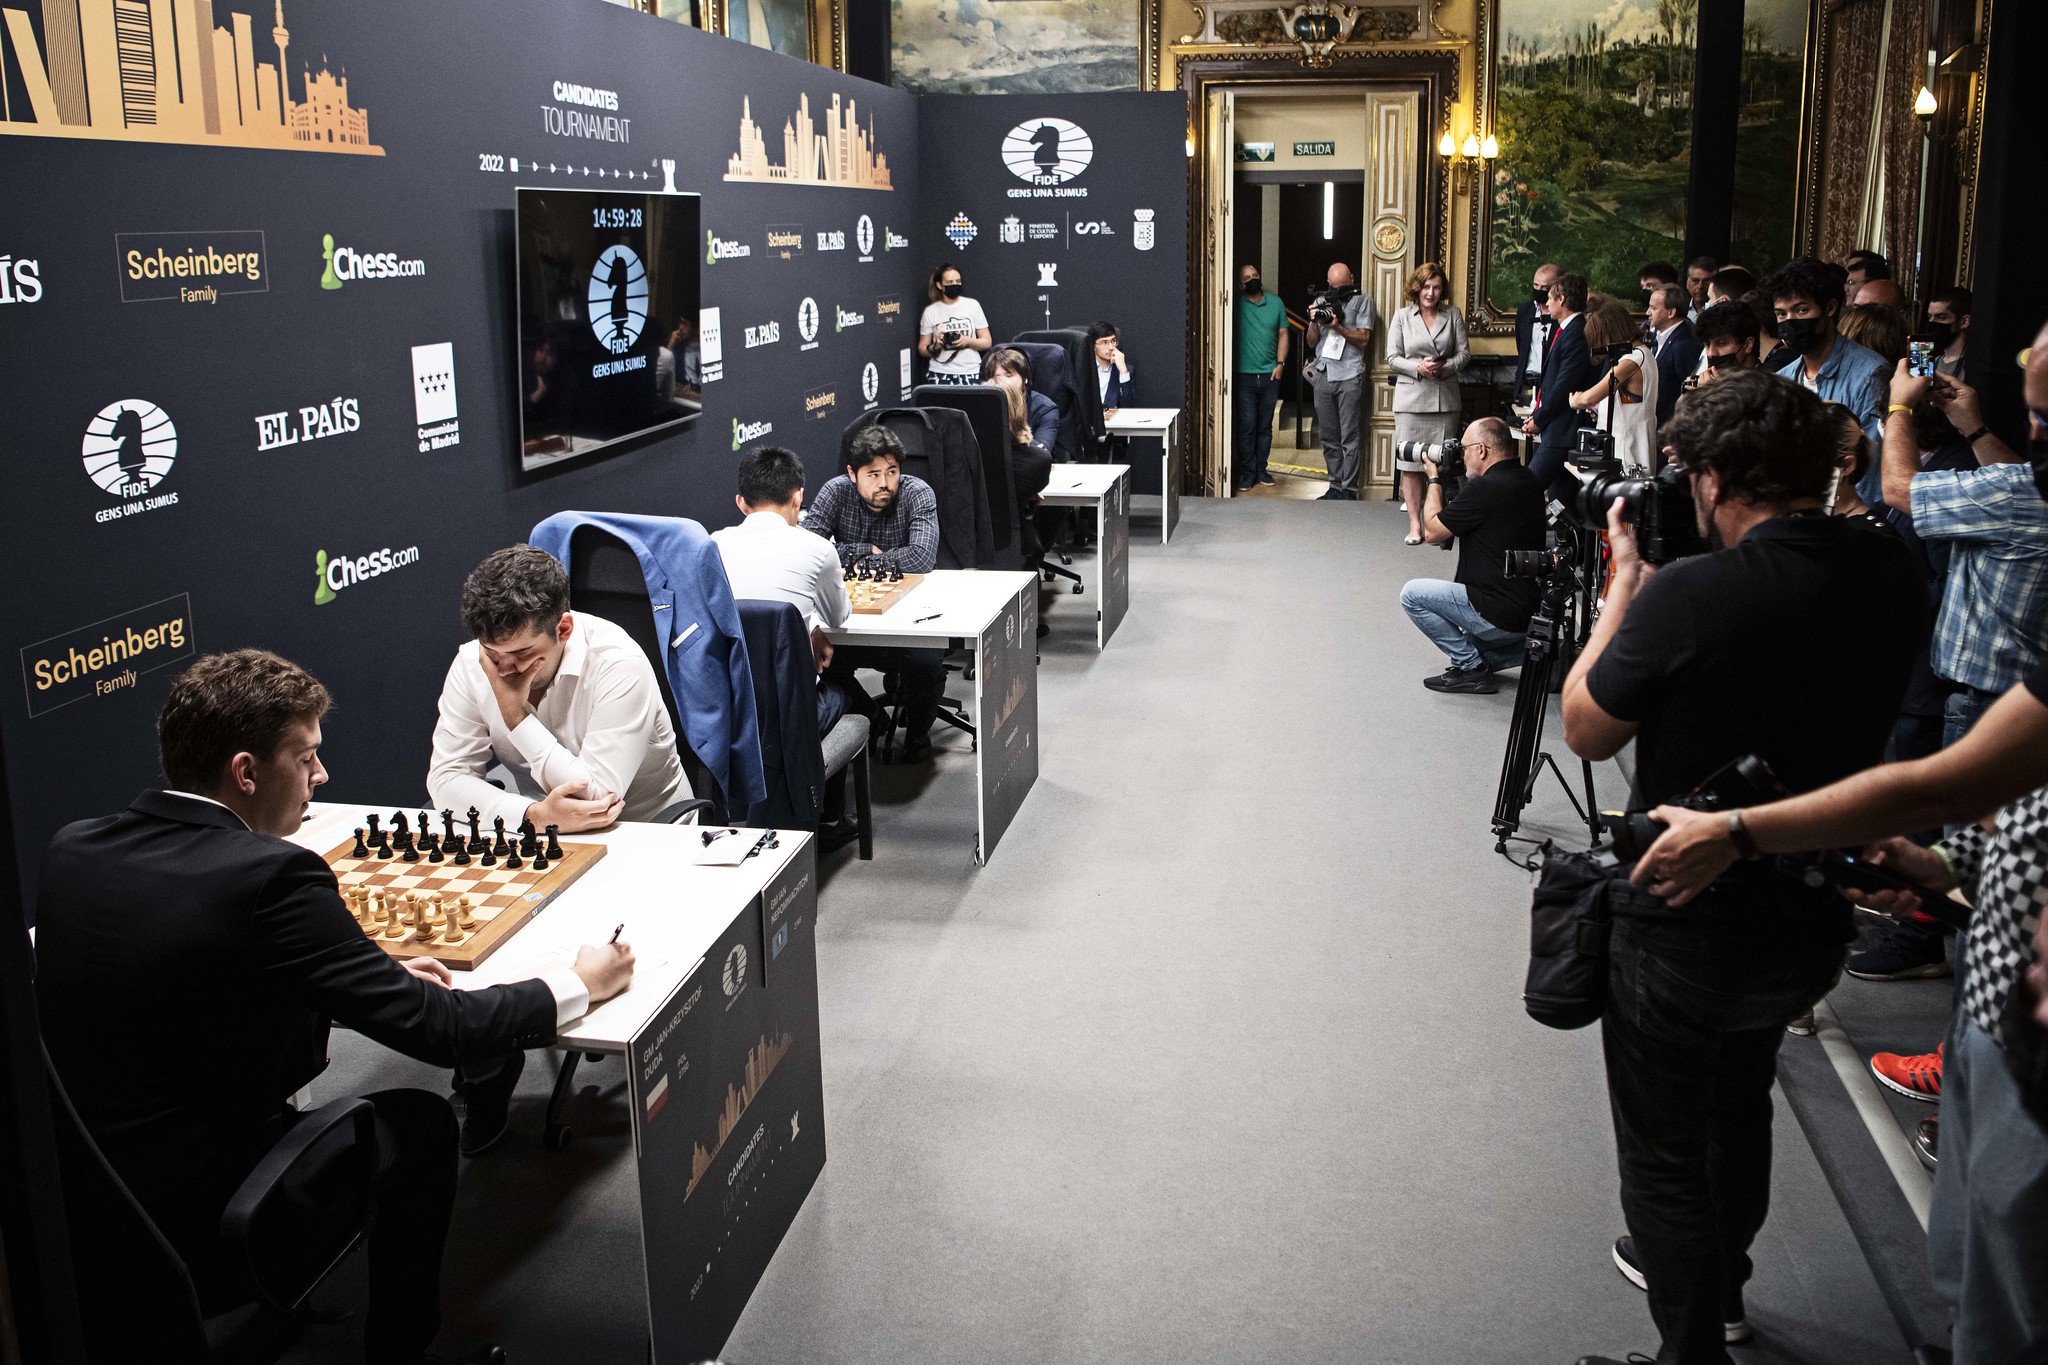 2022 FIDE Candidates Tournament came to a close on Tuesday in Madrid